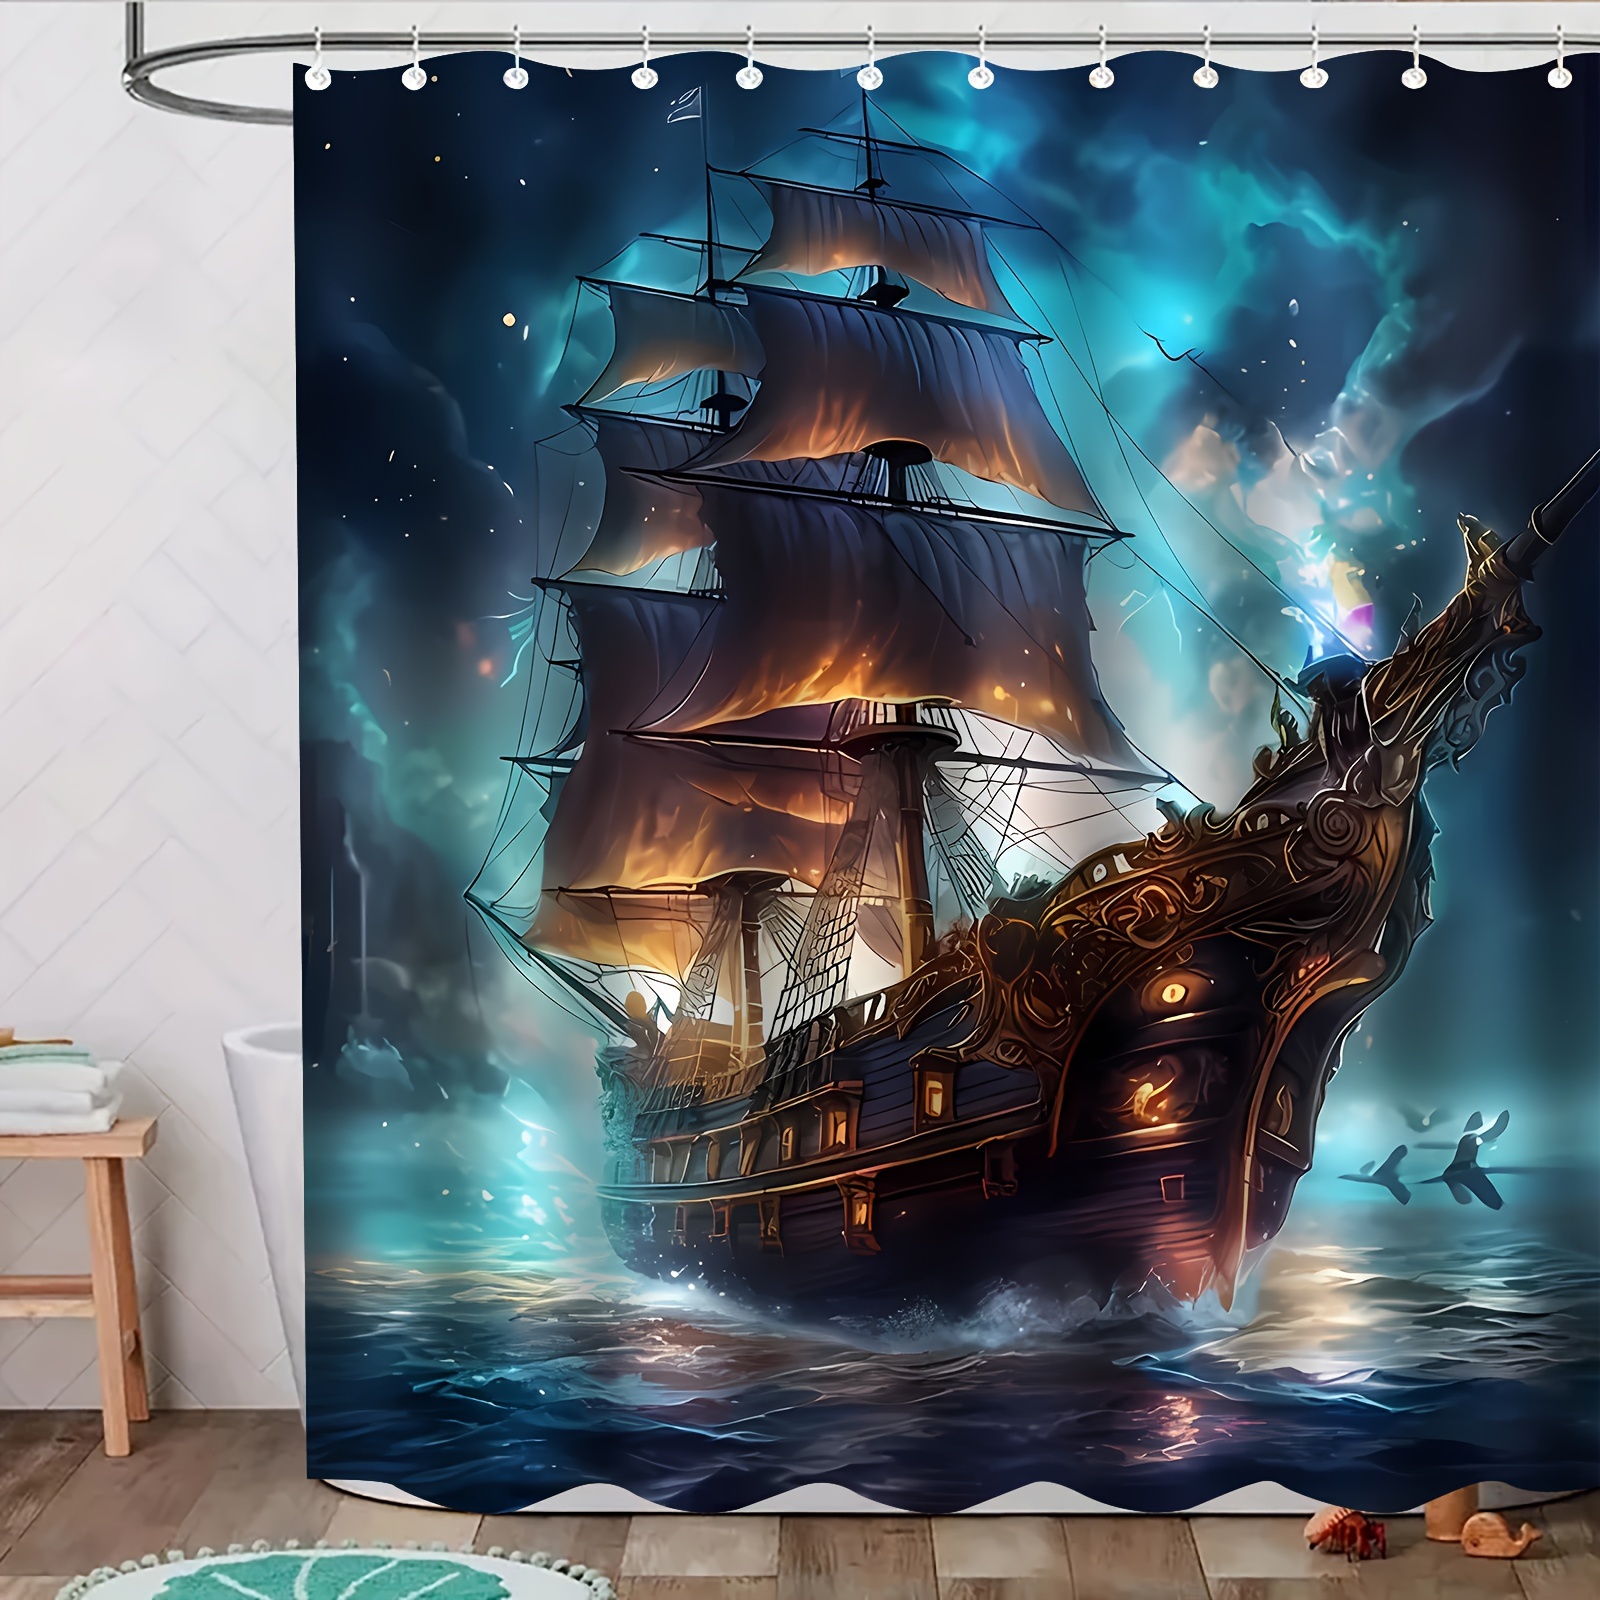 

1pc Nautical Pirate Ship Shower Curtain, 72x72 Inches, Waterproof Polyester Fabric With 12 Hooks, Machine Washable, Bathroom Curtain, Ocean Adventure Bath Decor